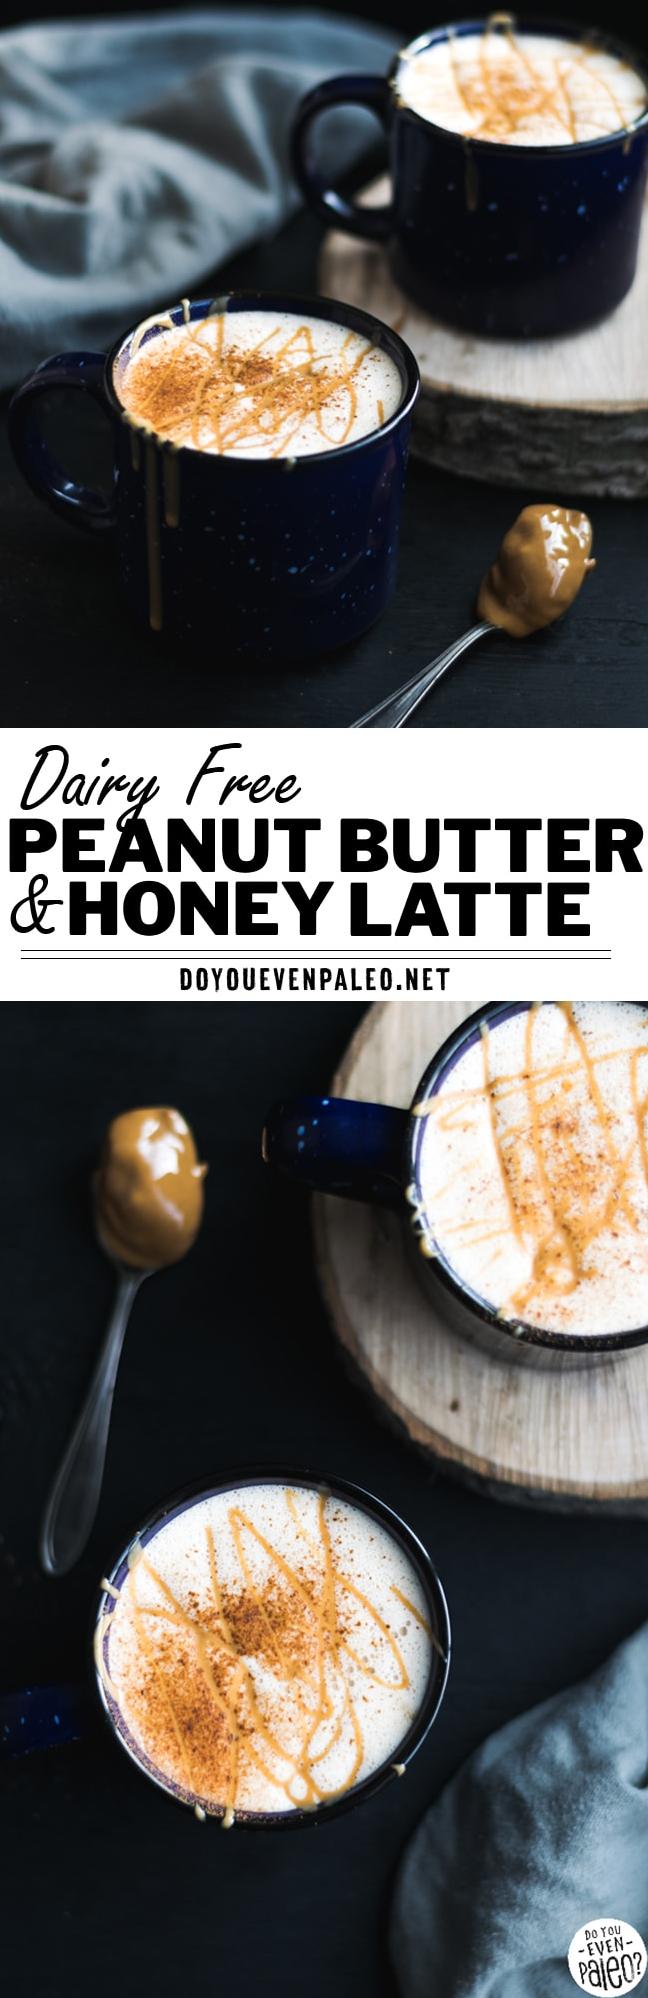  You're not dreaming, this Peanut Butter Honey Latte is real.